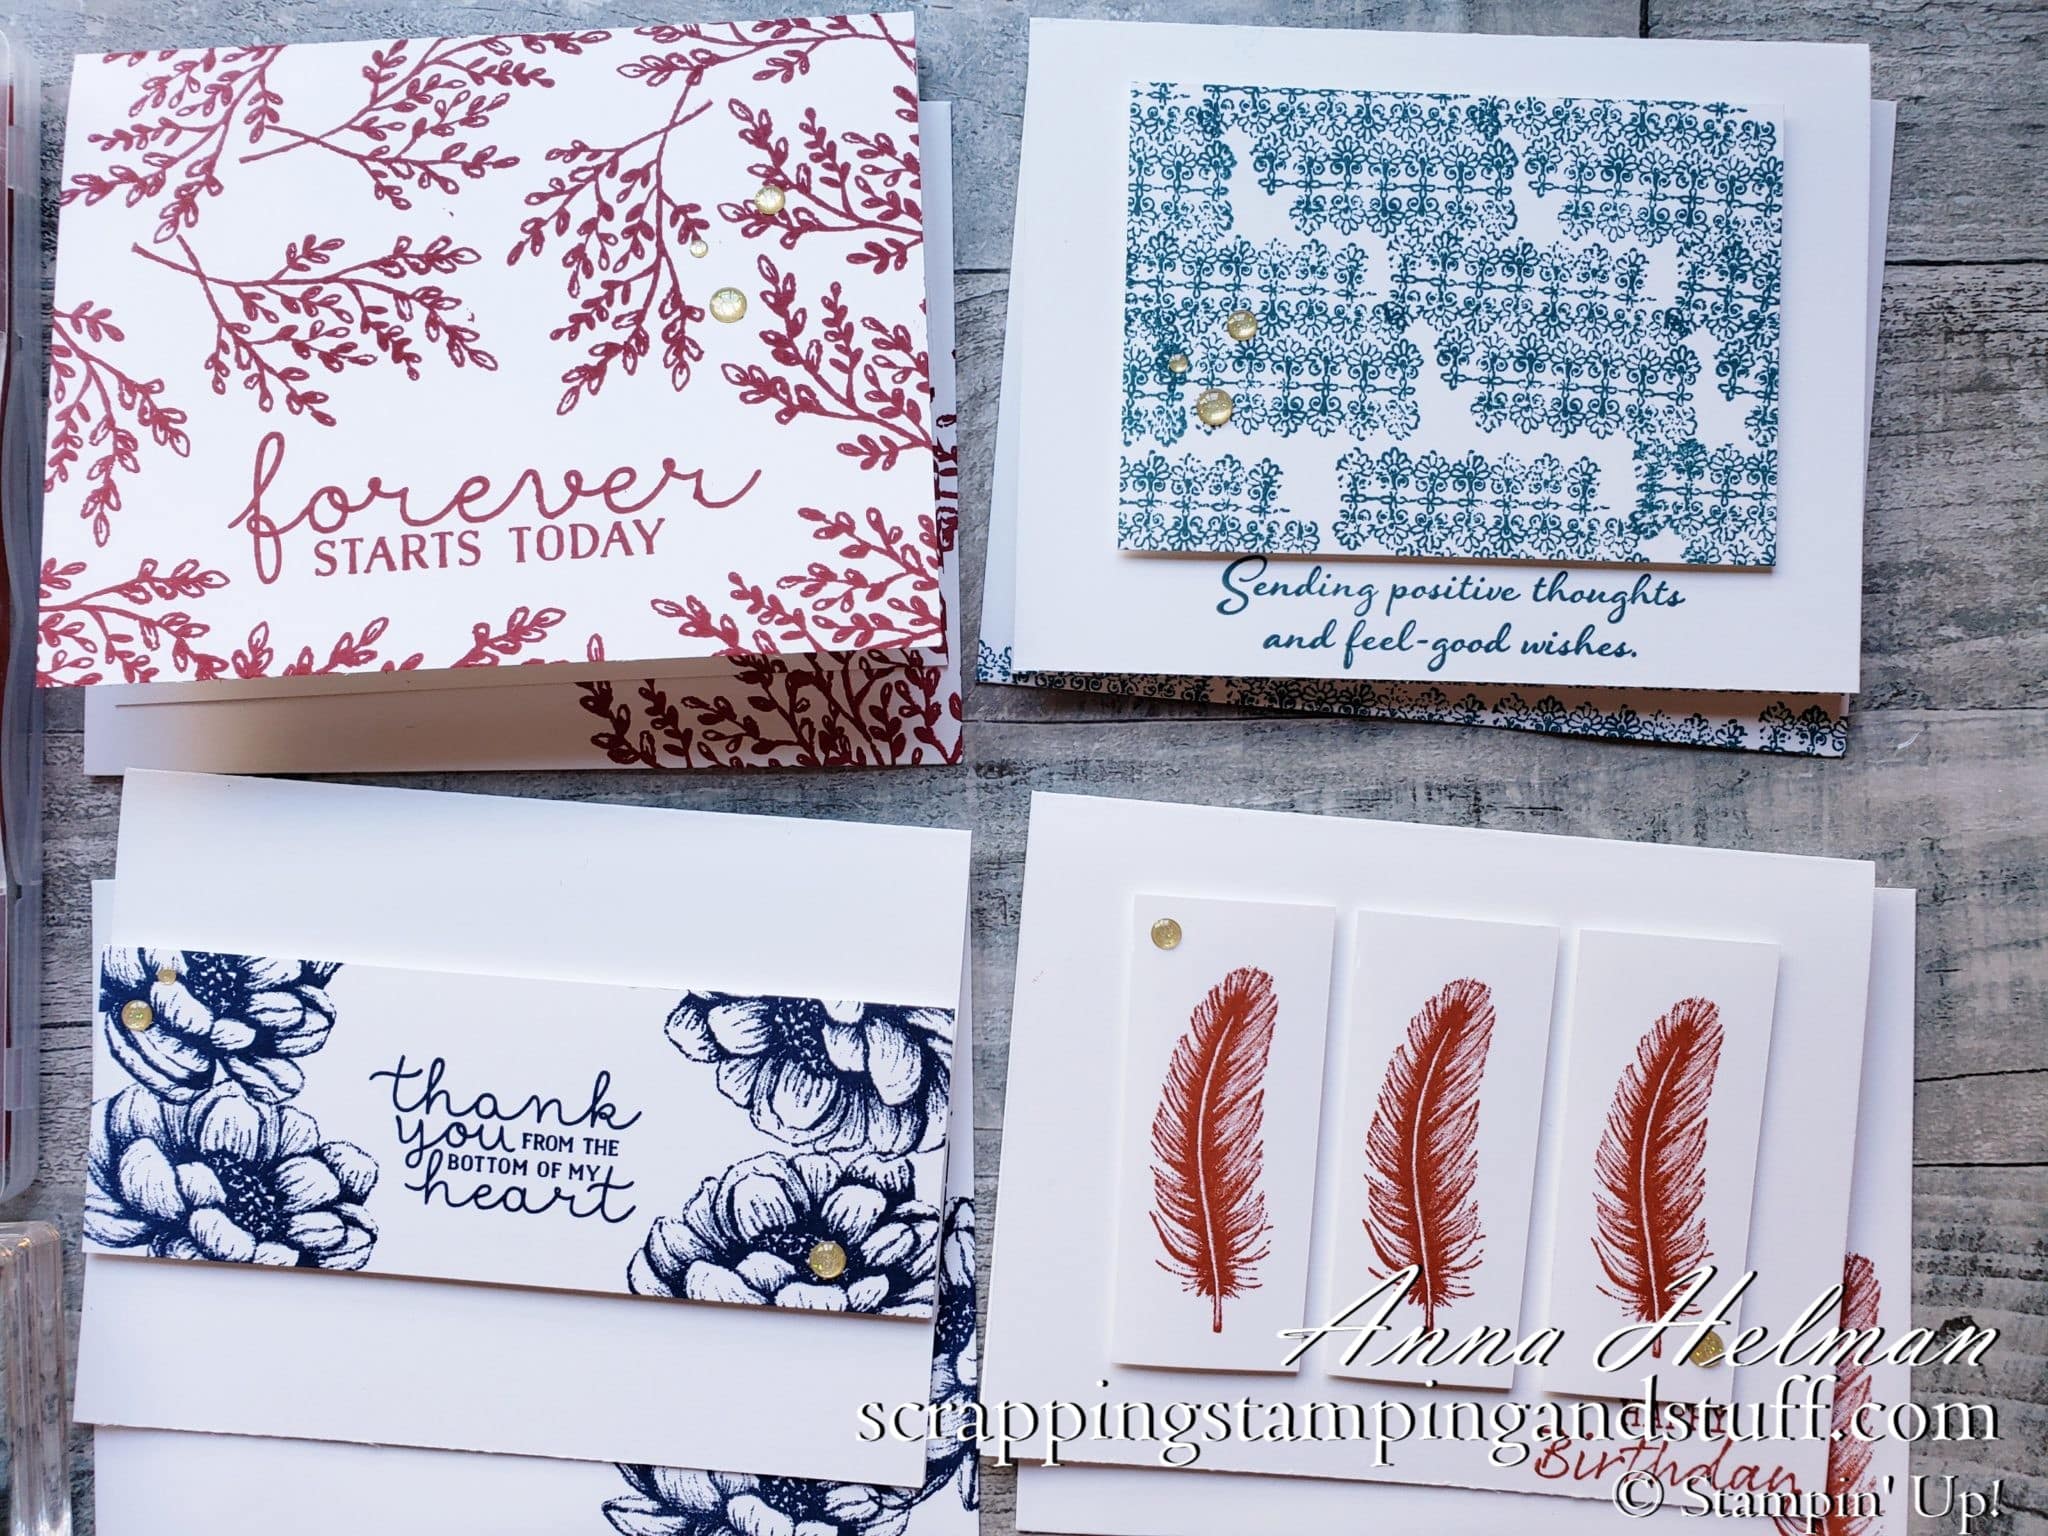 Simple Stamping Card Sets Make Inexpensive and Personal Gifts!